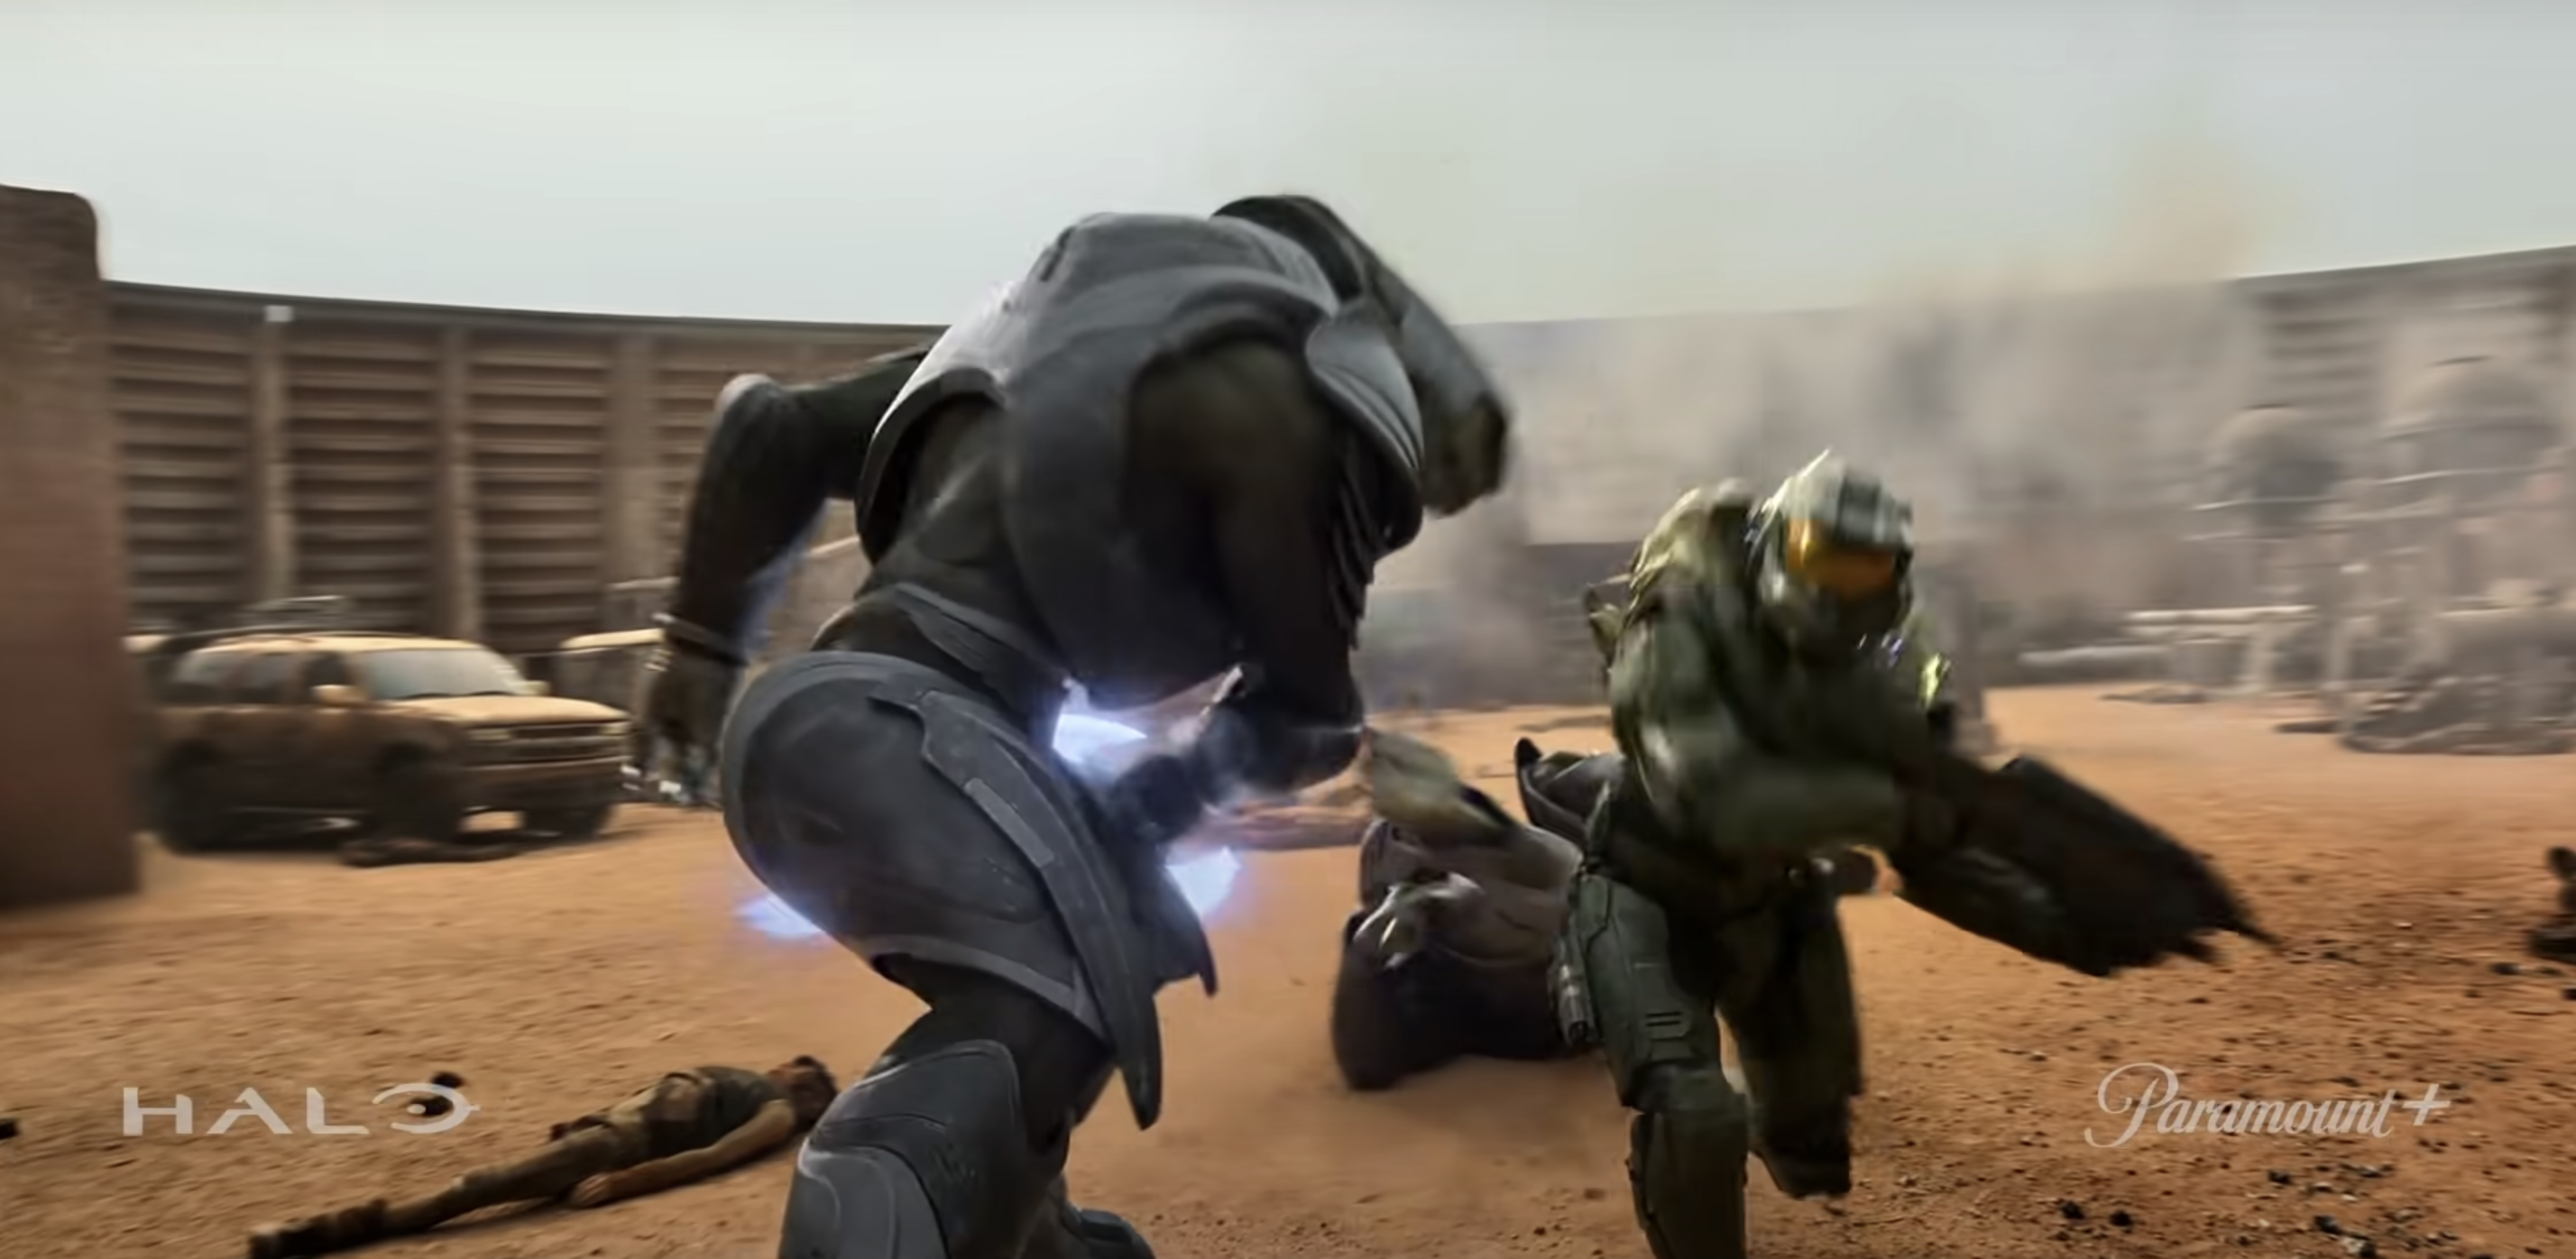 Master Chief fighting an Elite in the Halo TV show trailer